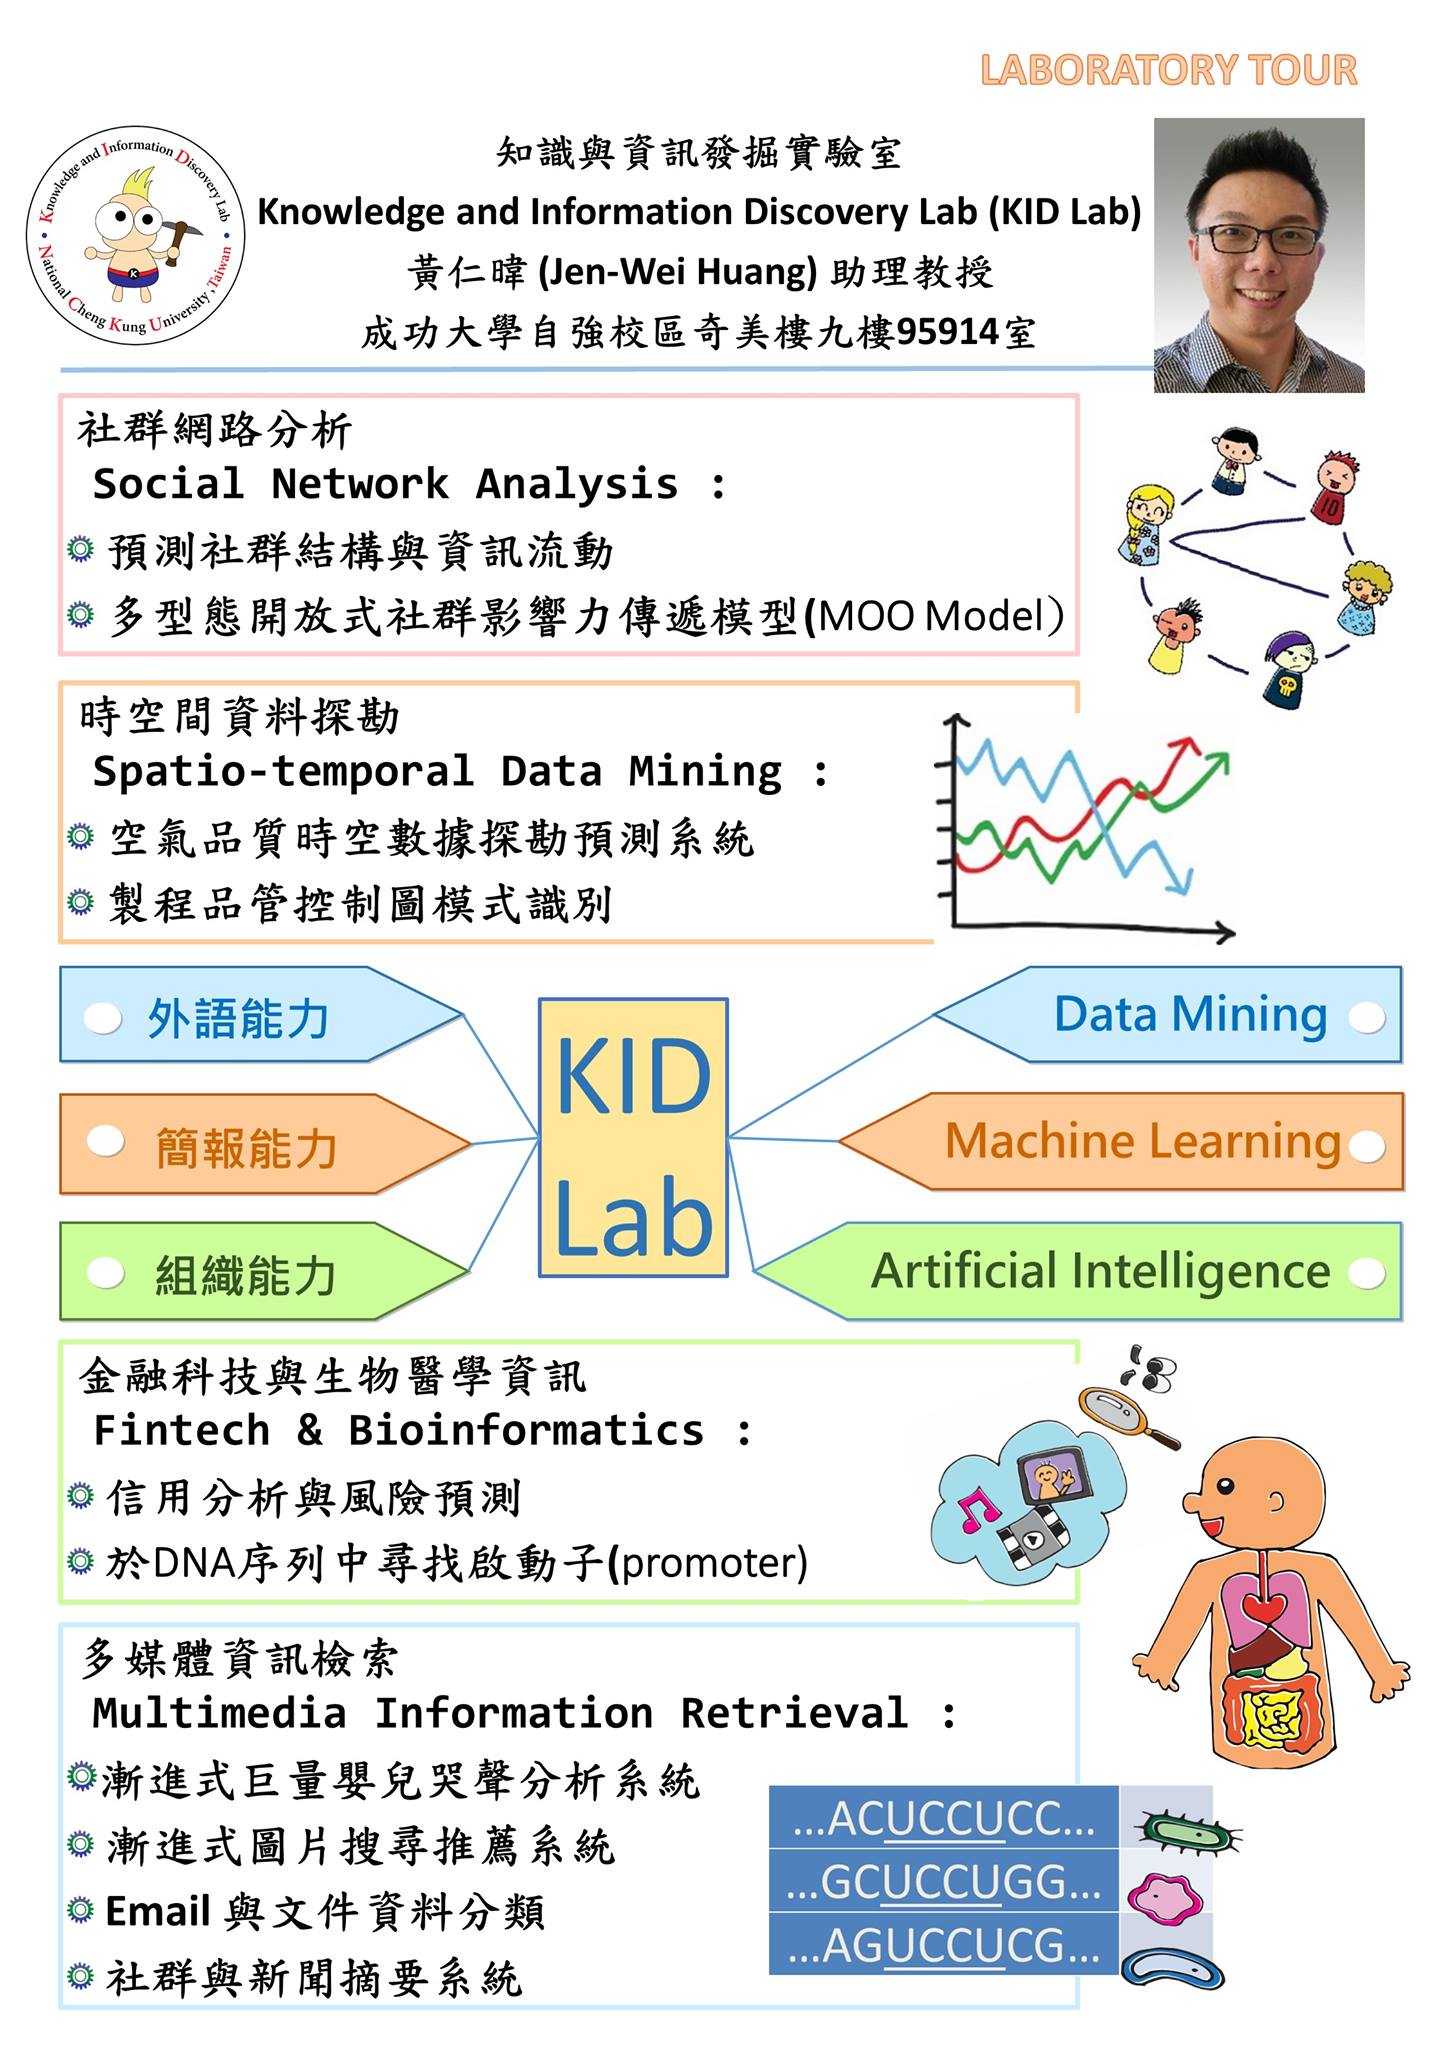 About KID Lab